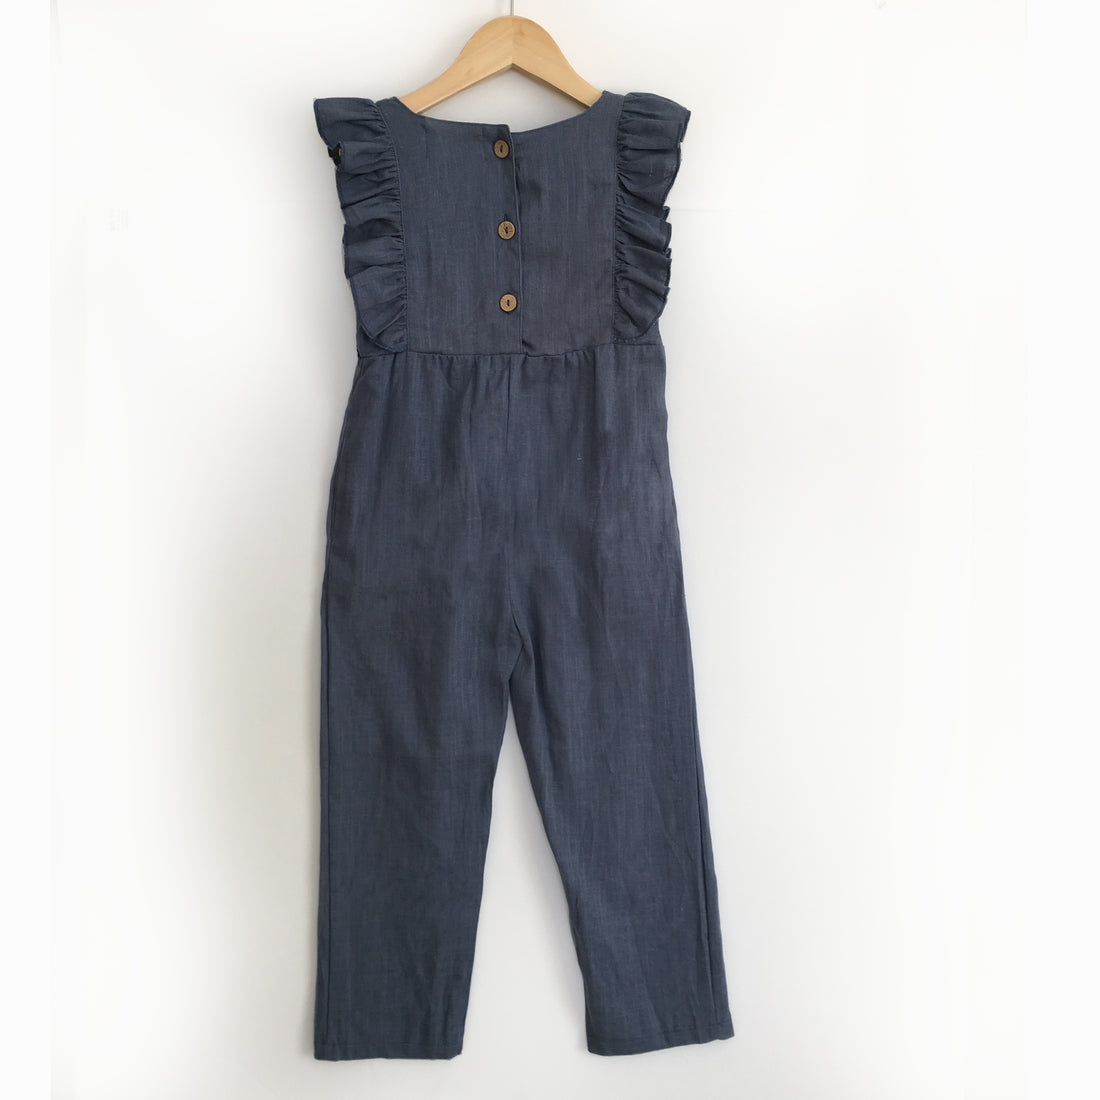 Navy Blue Linen Ruffle Romper with Pants (2T-6)